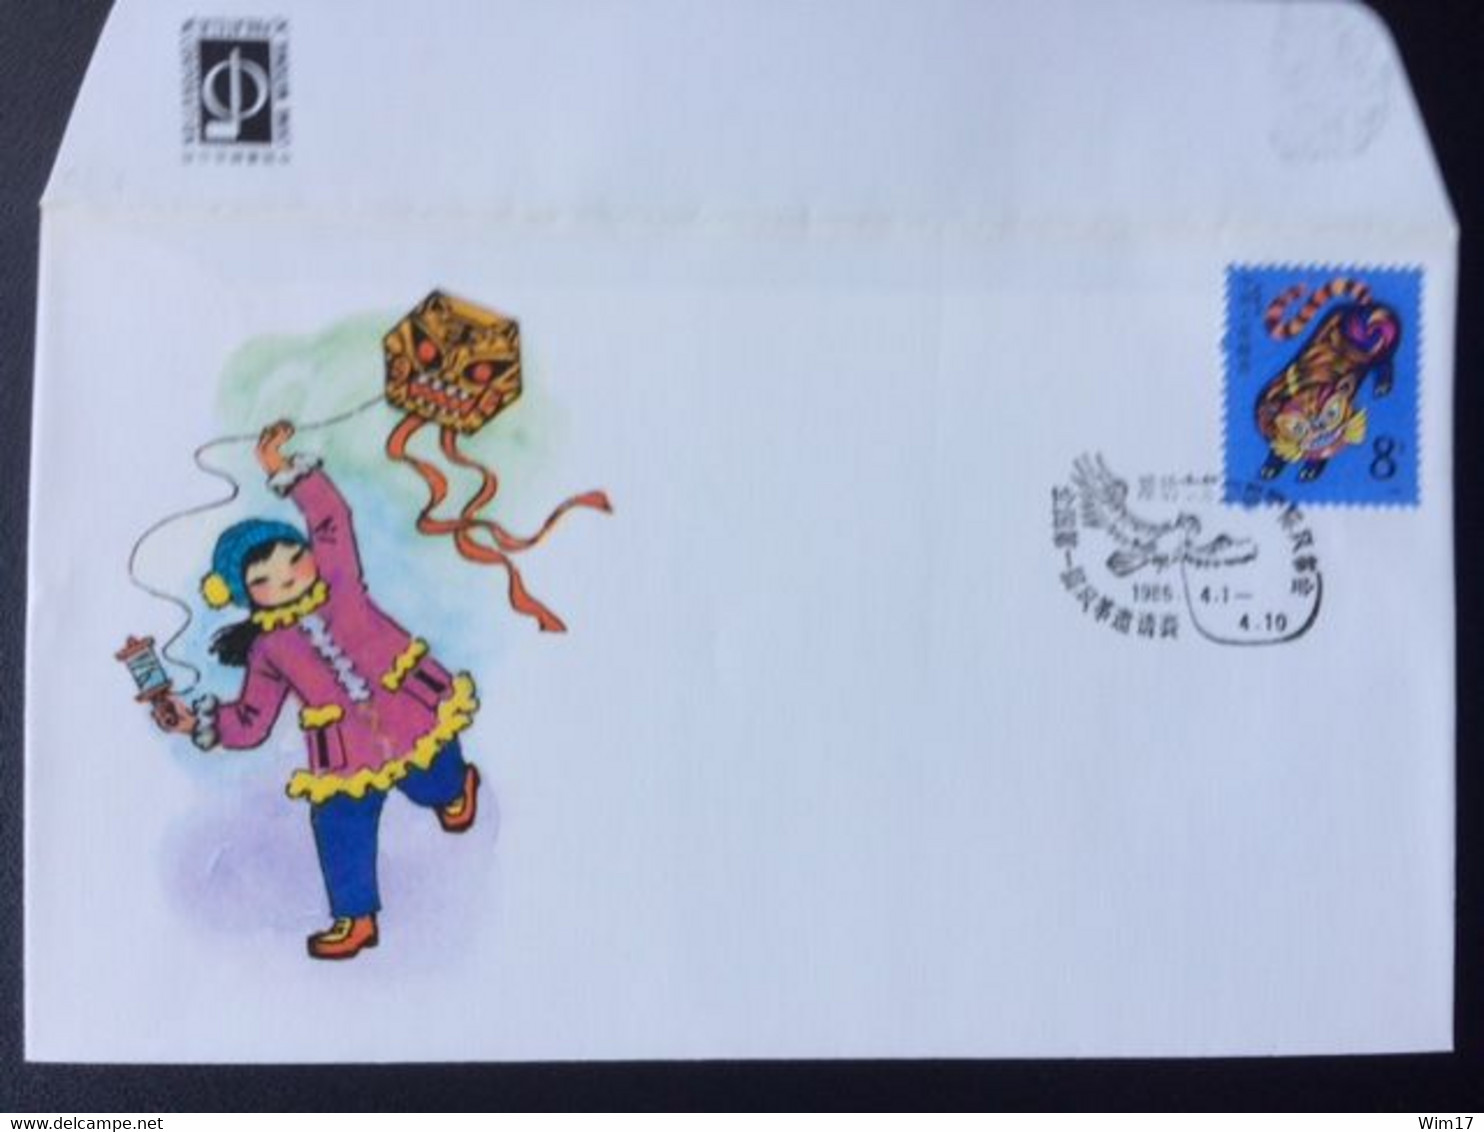 CHINA 1986 FDC 3RD INT. KITE FESTIVAL - 1980-1989